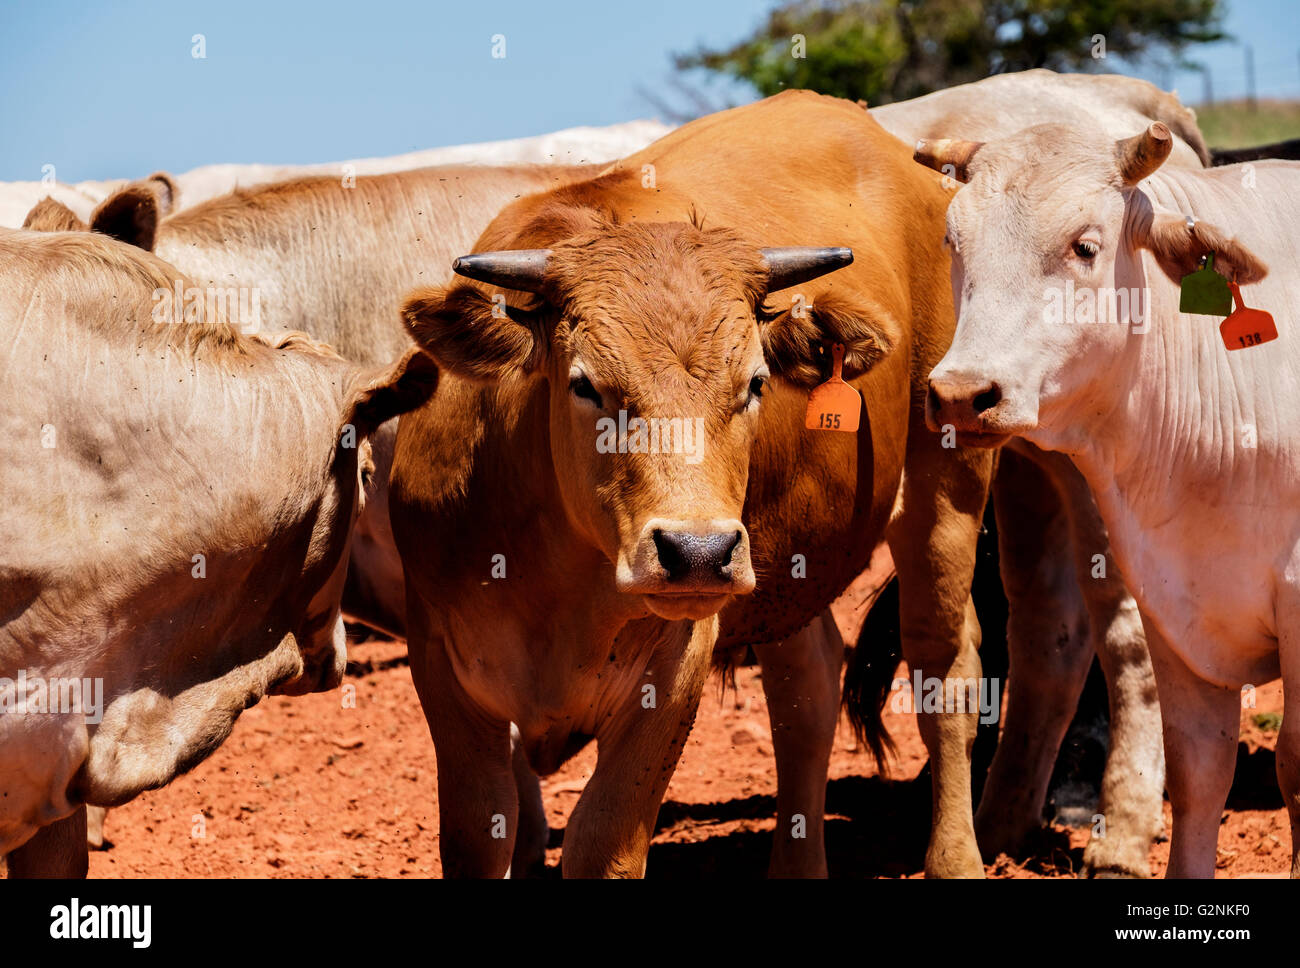 A close up view of a few cows in Oklahoma, USA. Stock Photo